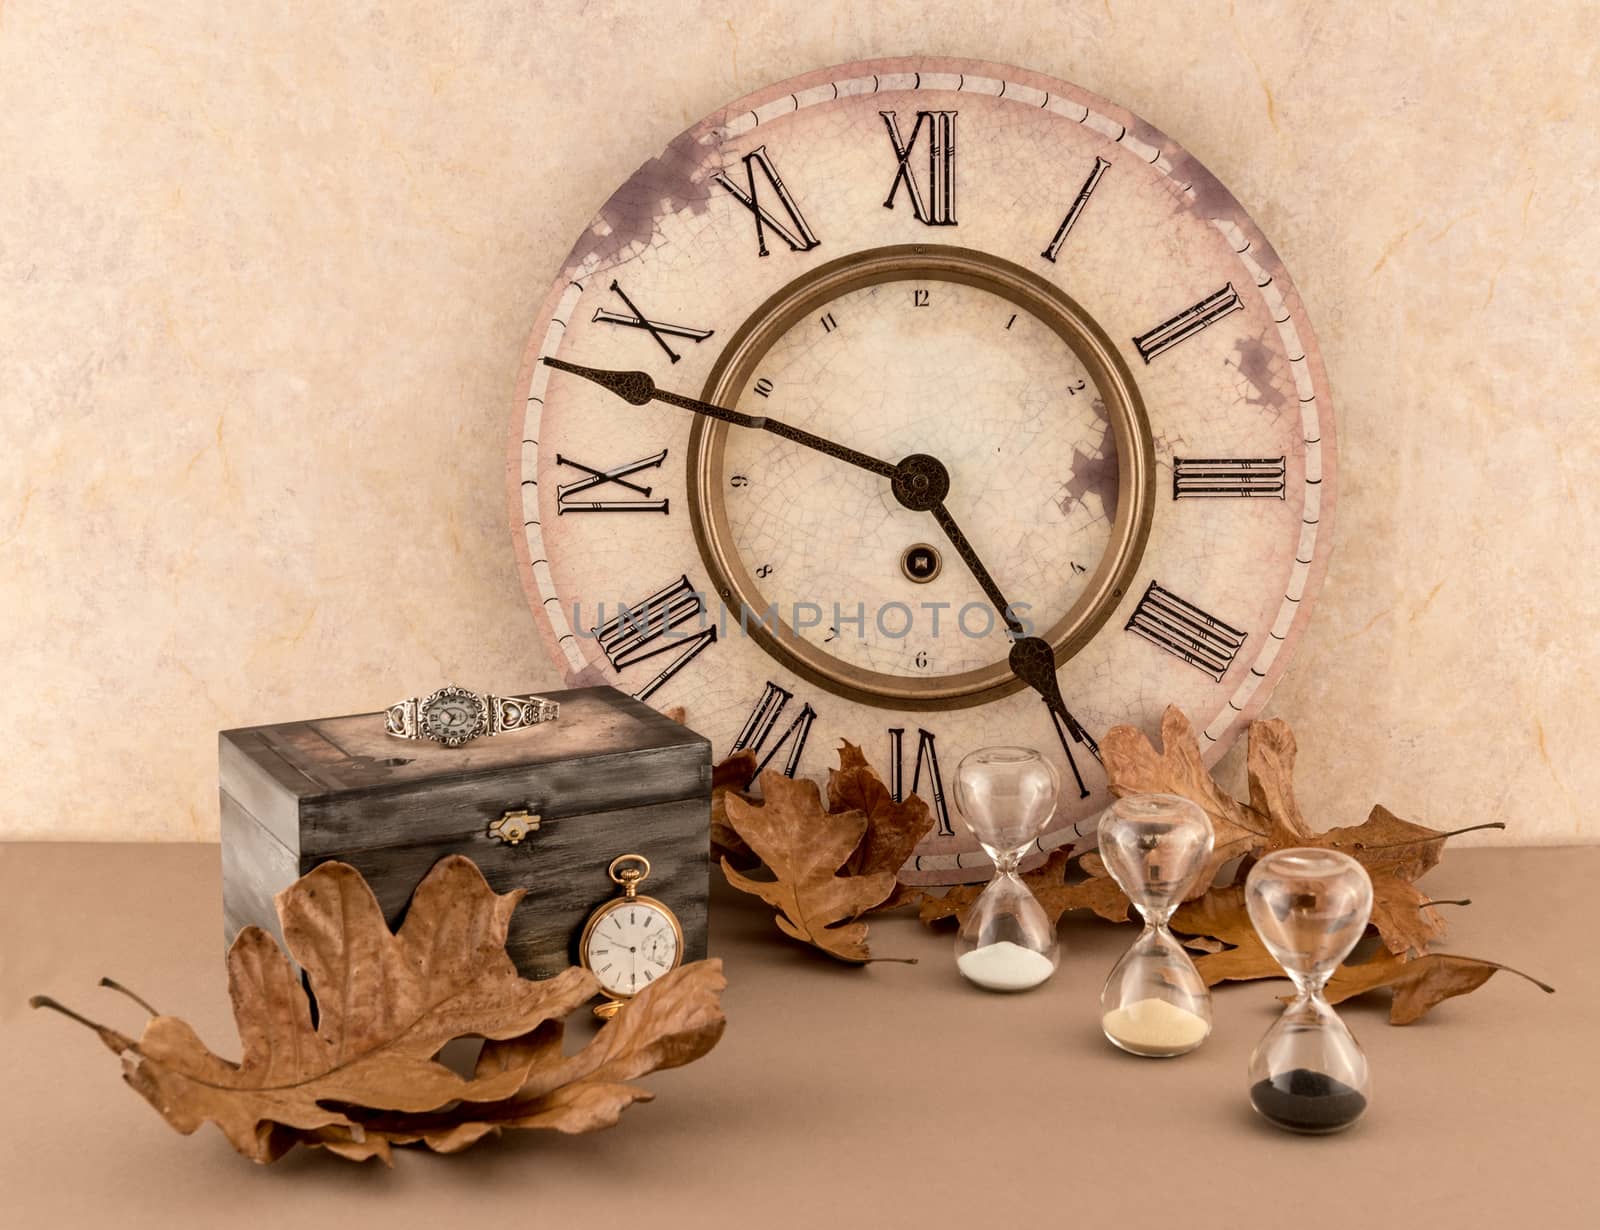 Wall Clock, Hourglassess, Wristwatch, and Pocketwatch with Autumn Leaves by krisblackphotography